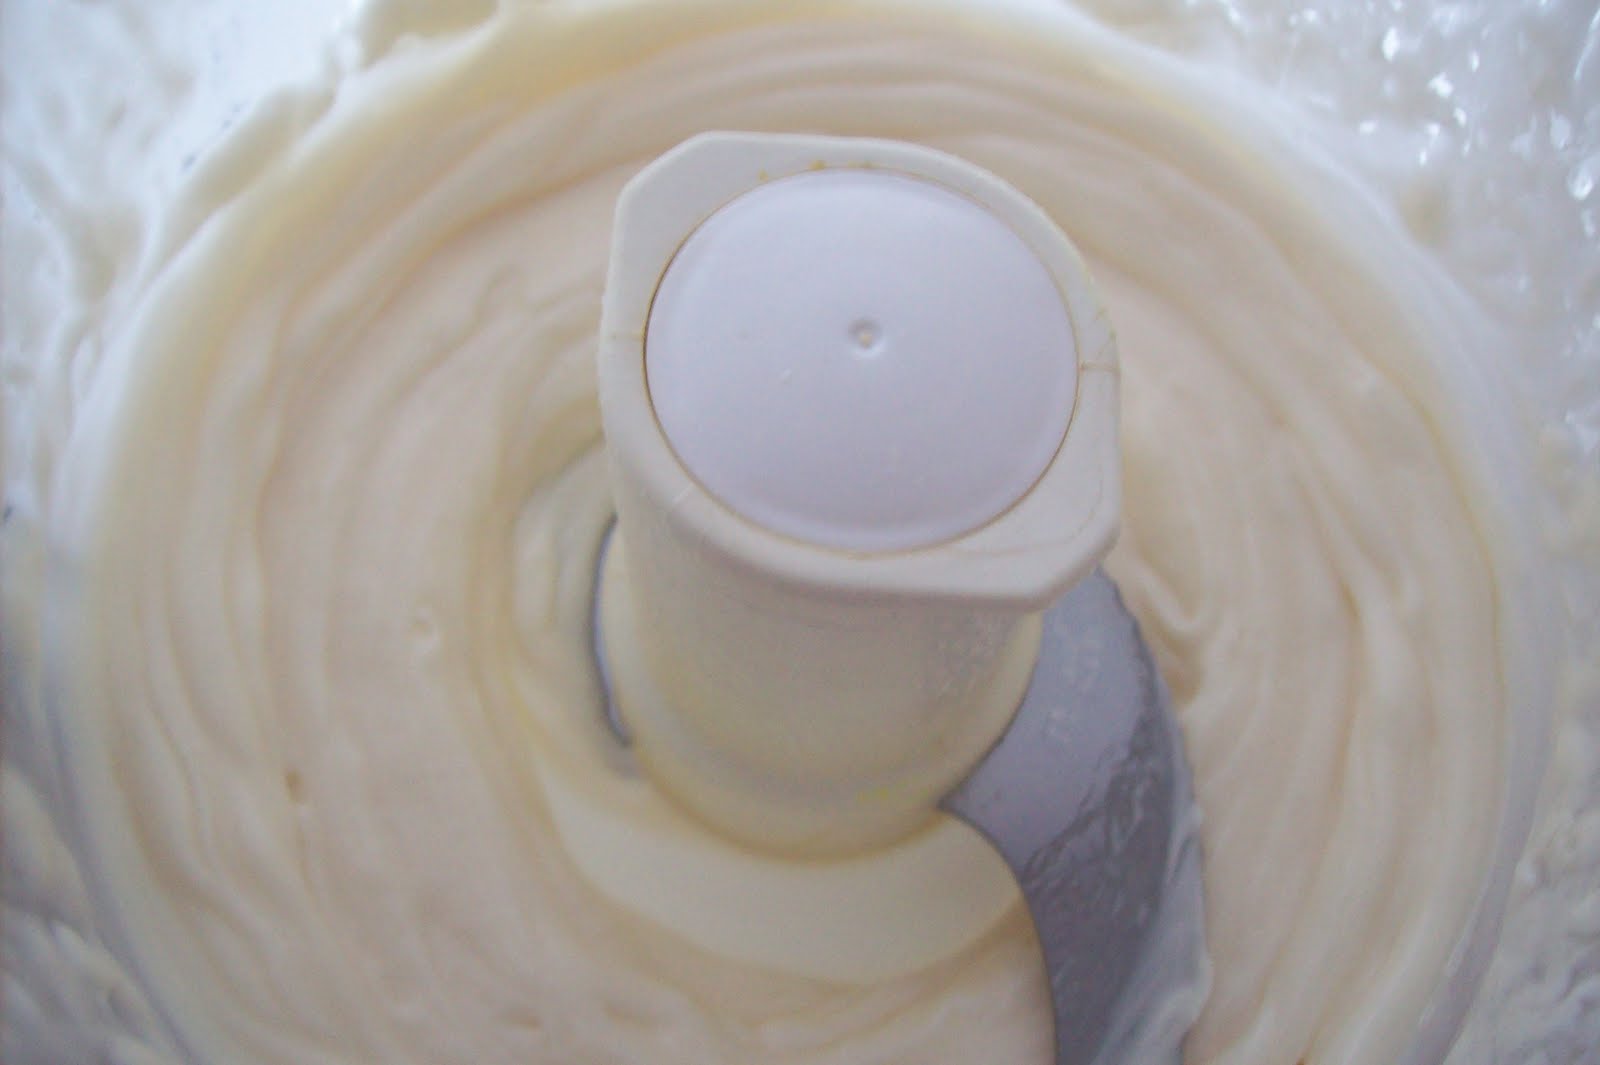 How To Make Mayonnaise In A Food Processor